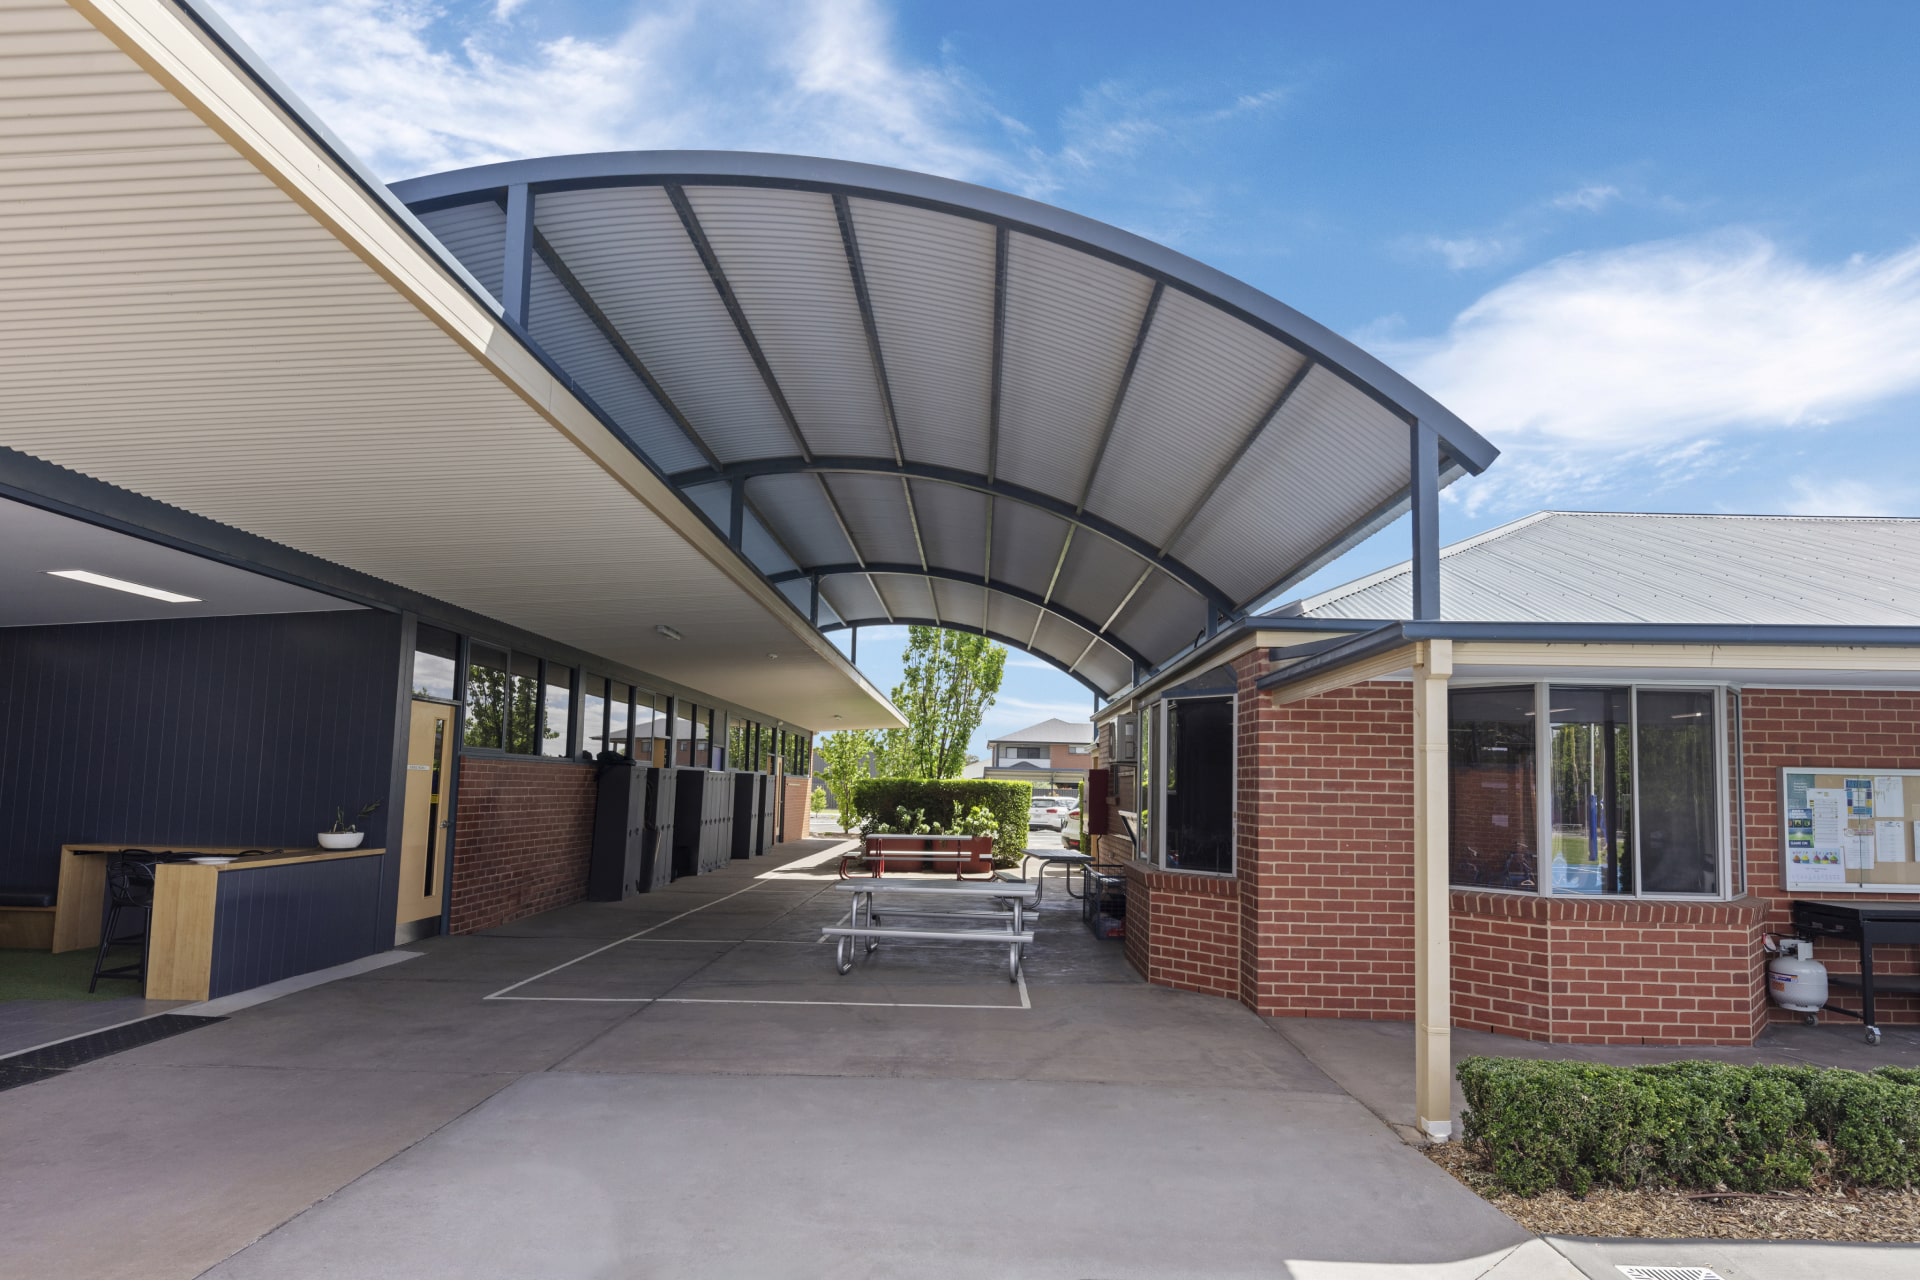 one school courtyard steel shade cover canopy structure